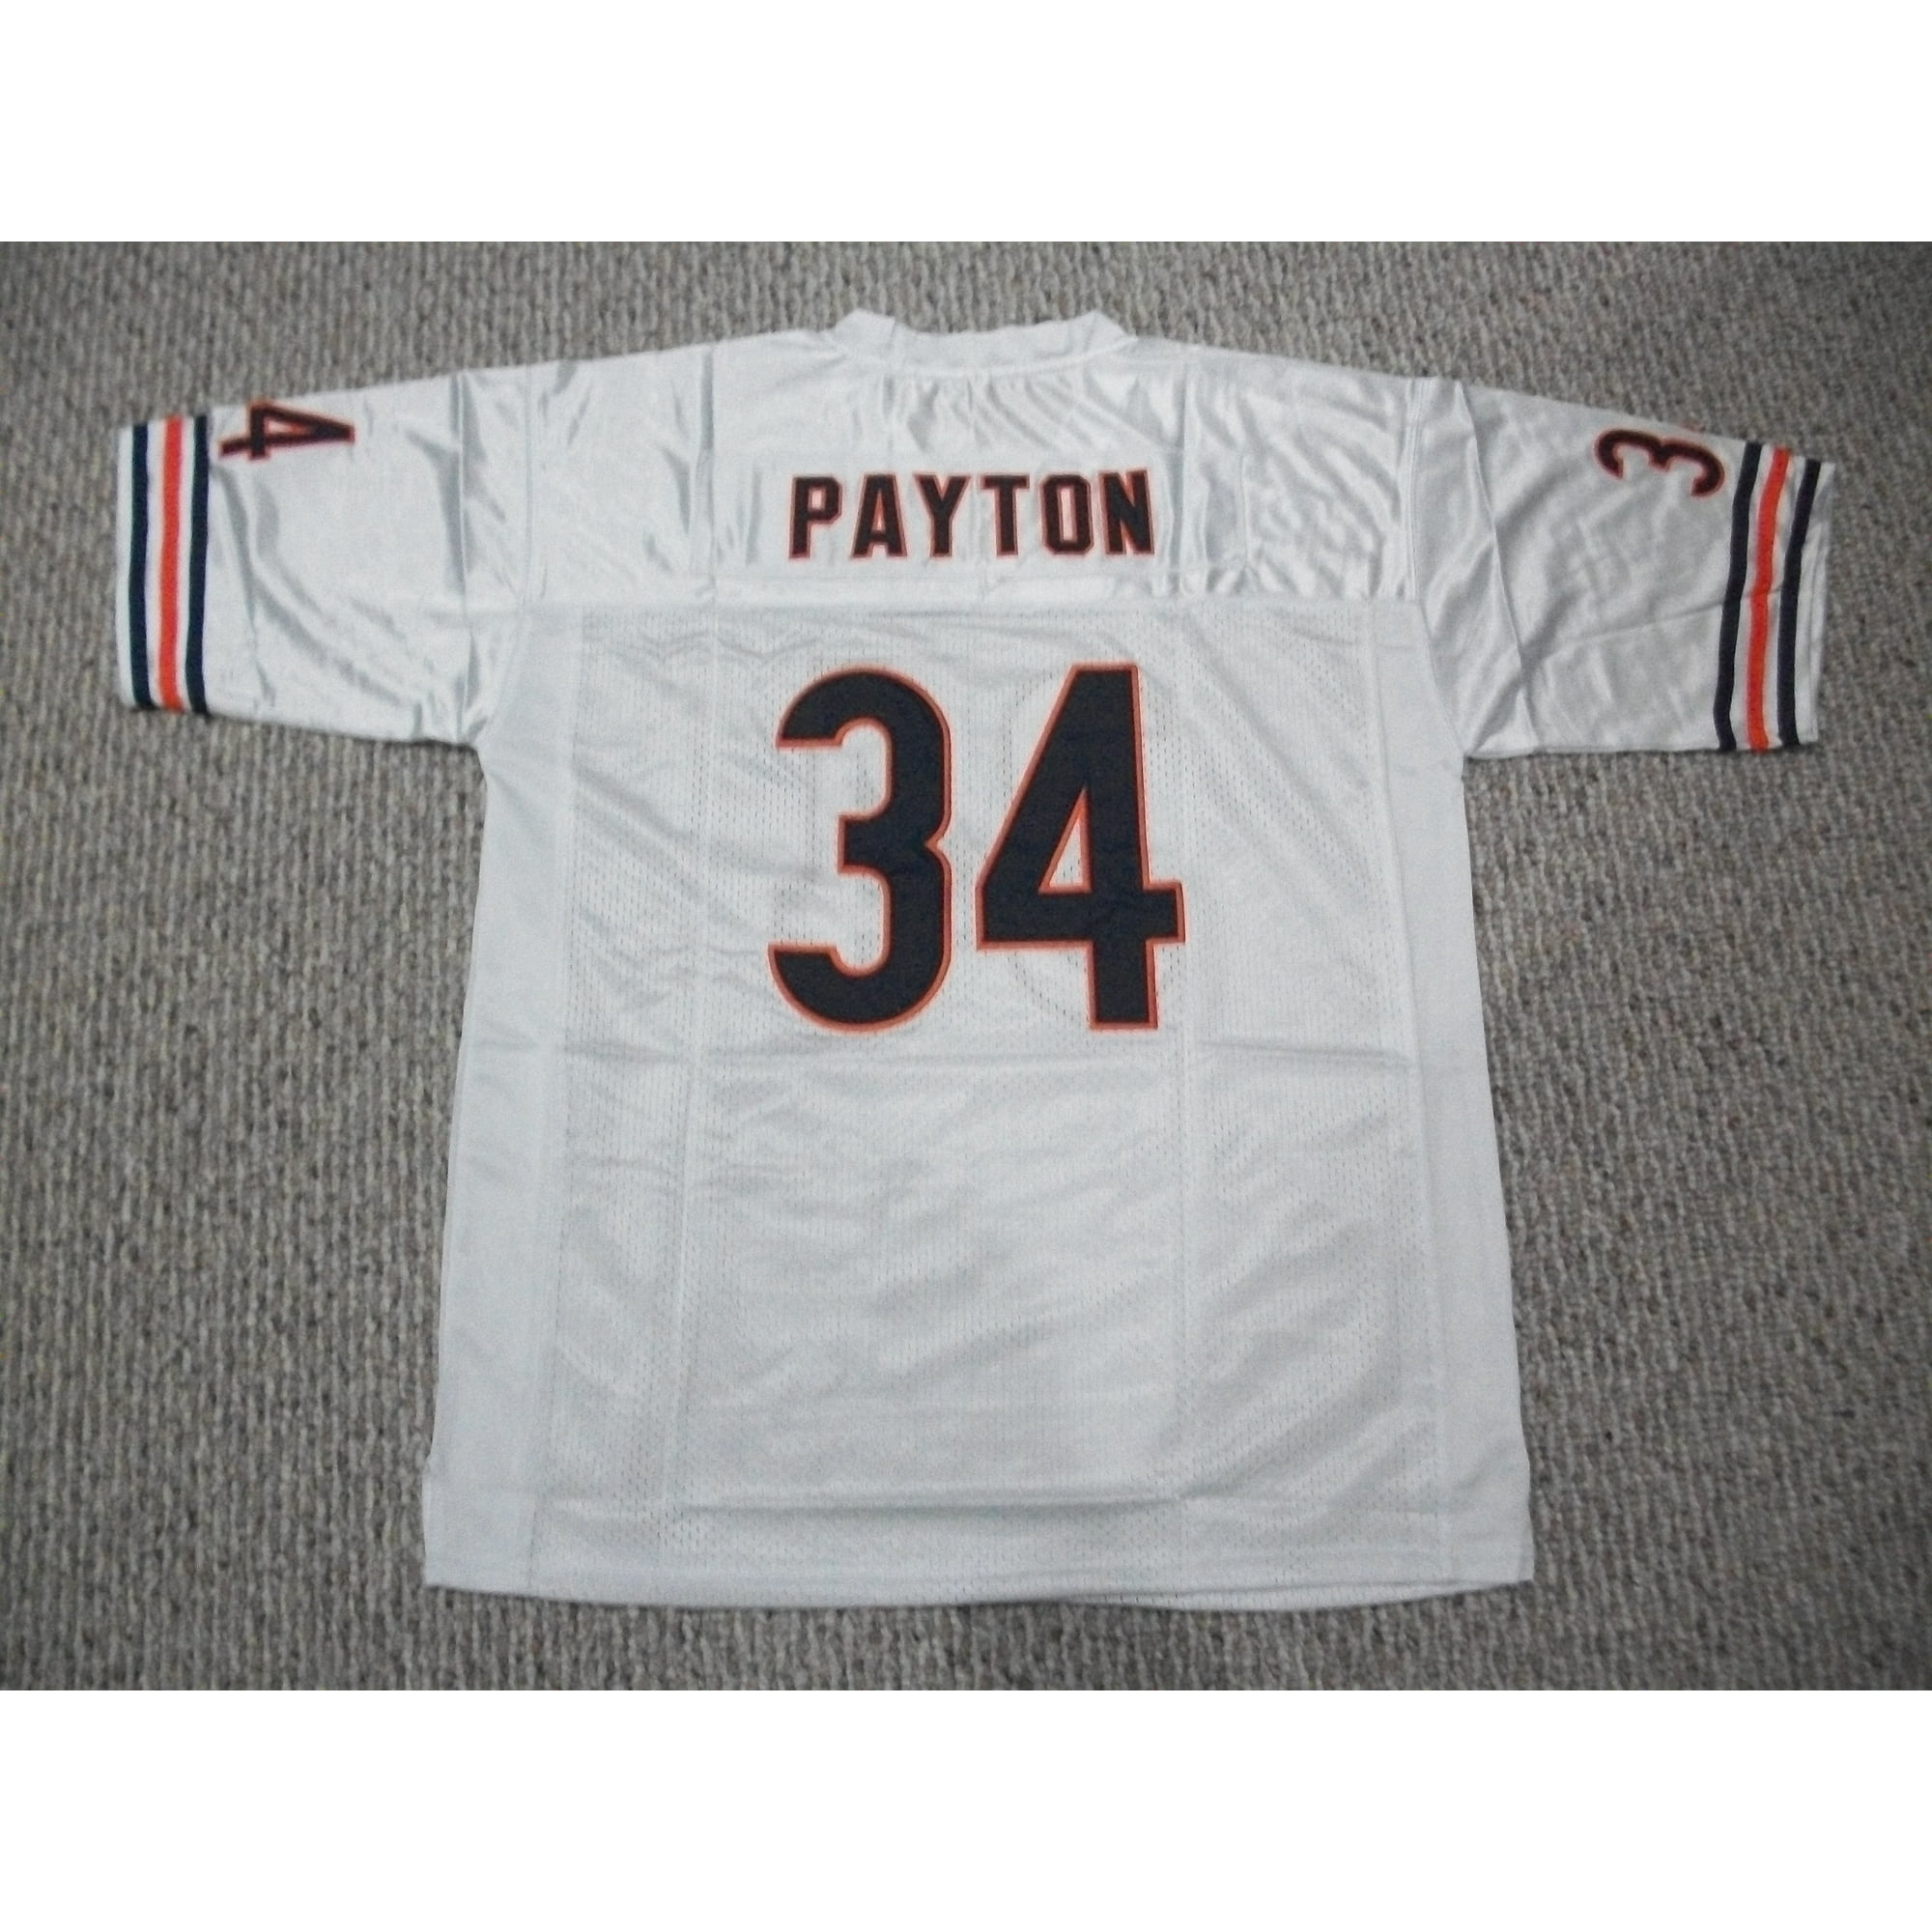 Walter Payton UNSIGNED Framed Jersey Chicago Bears